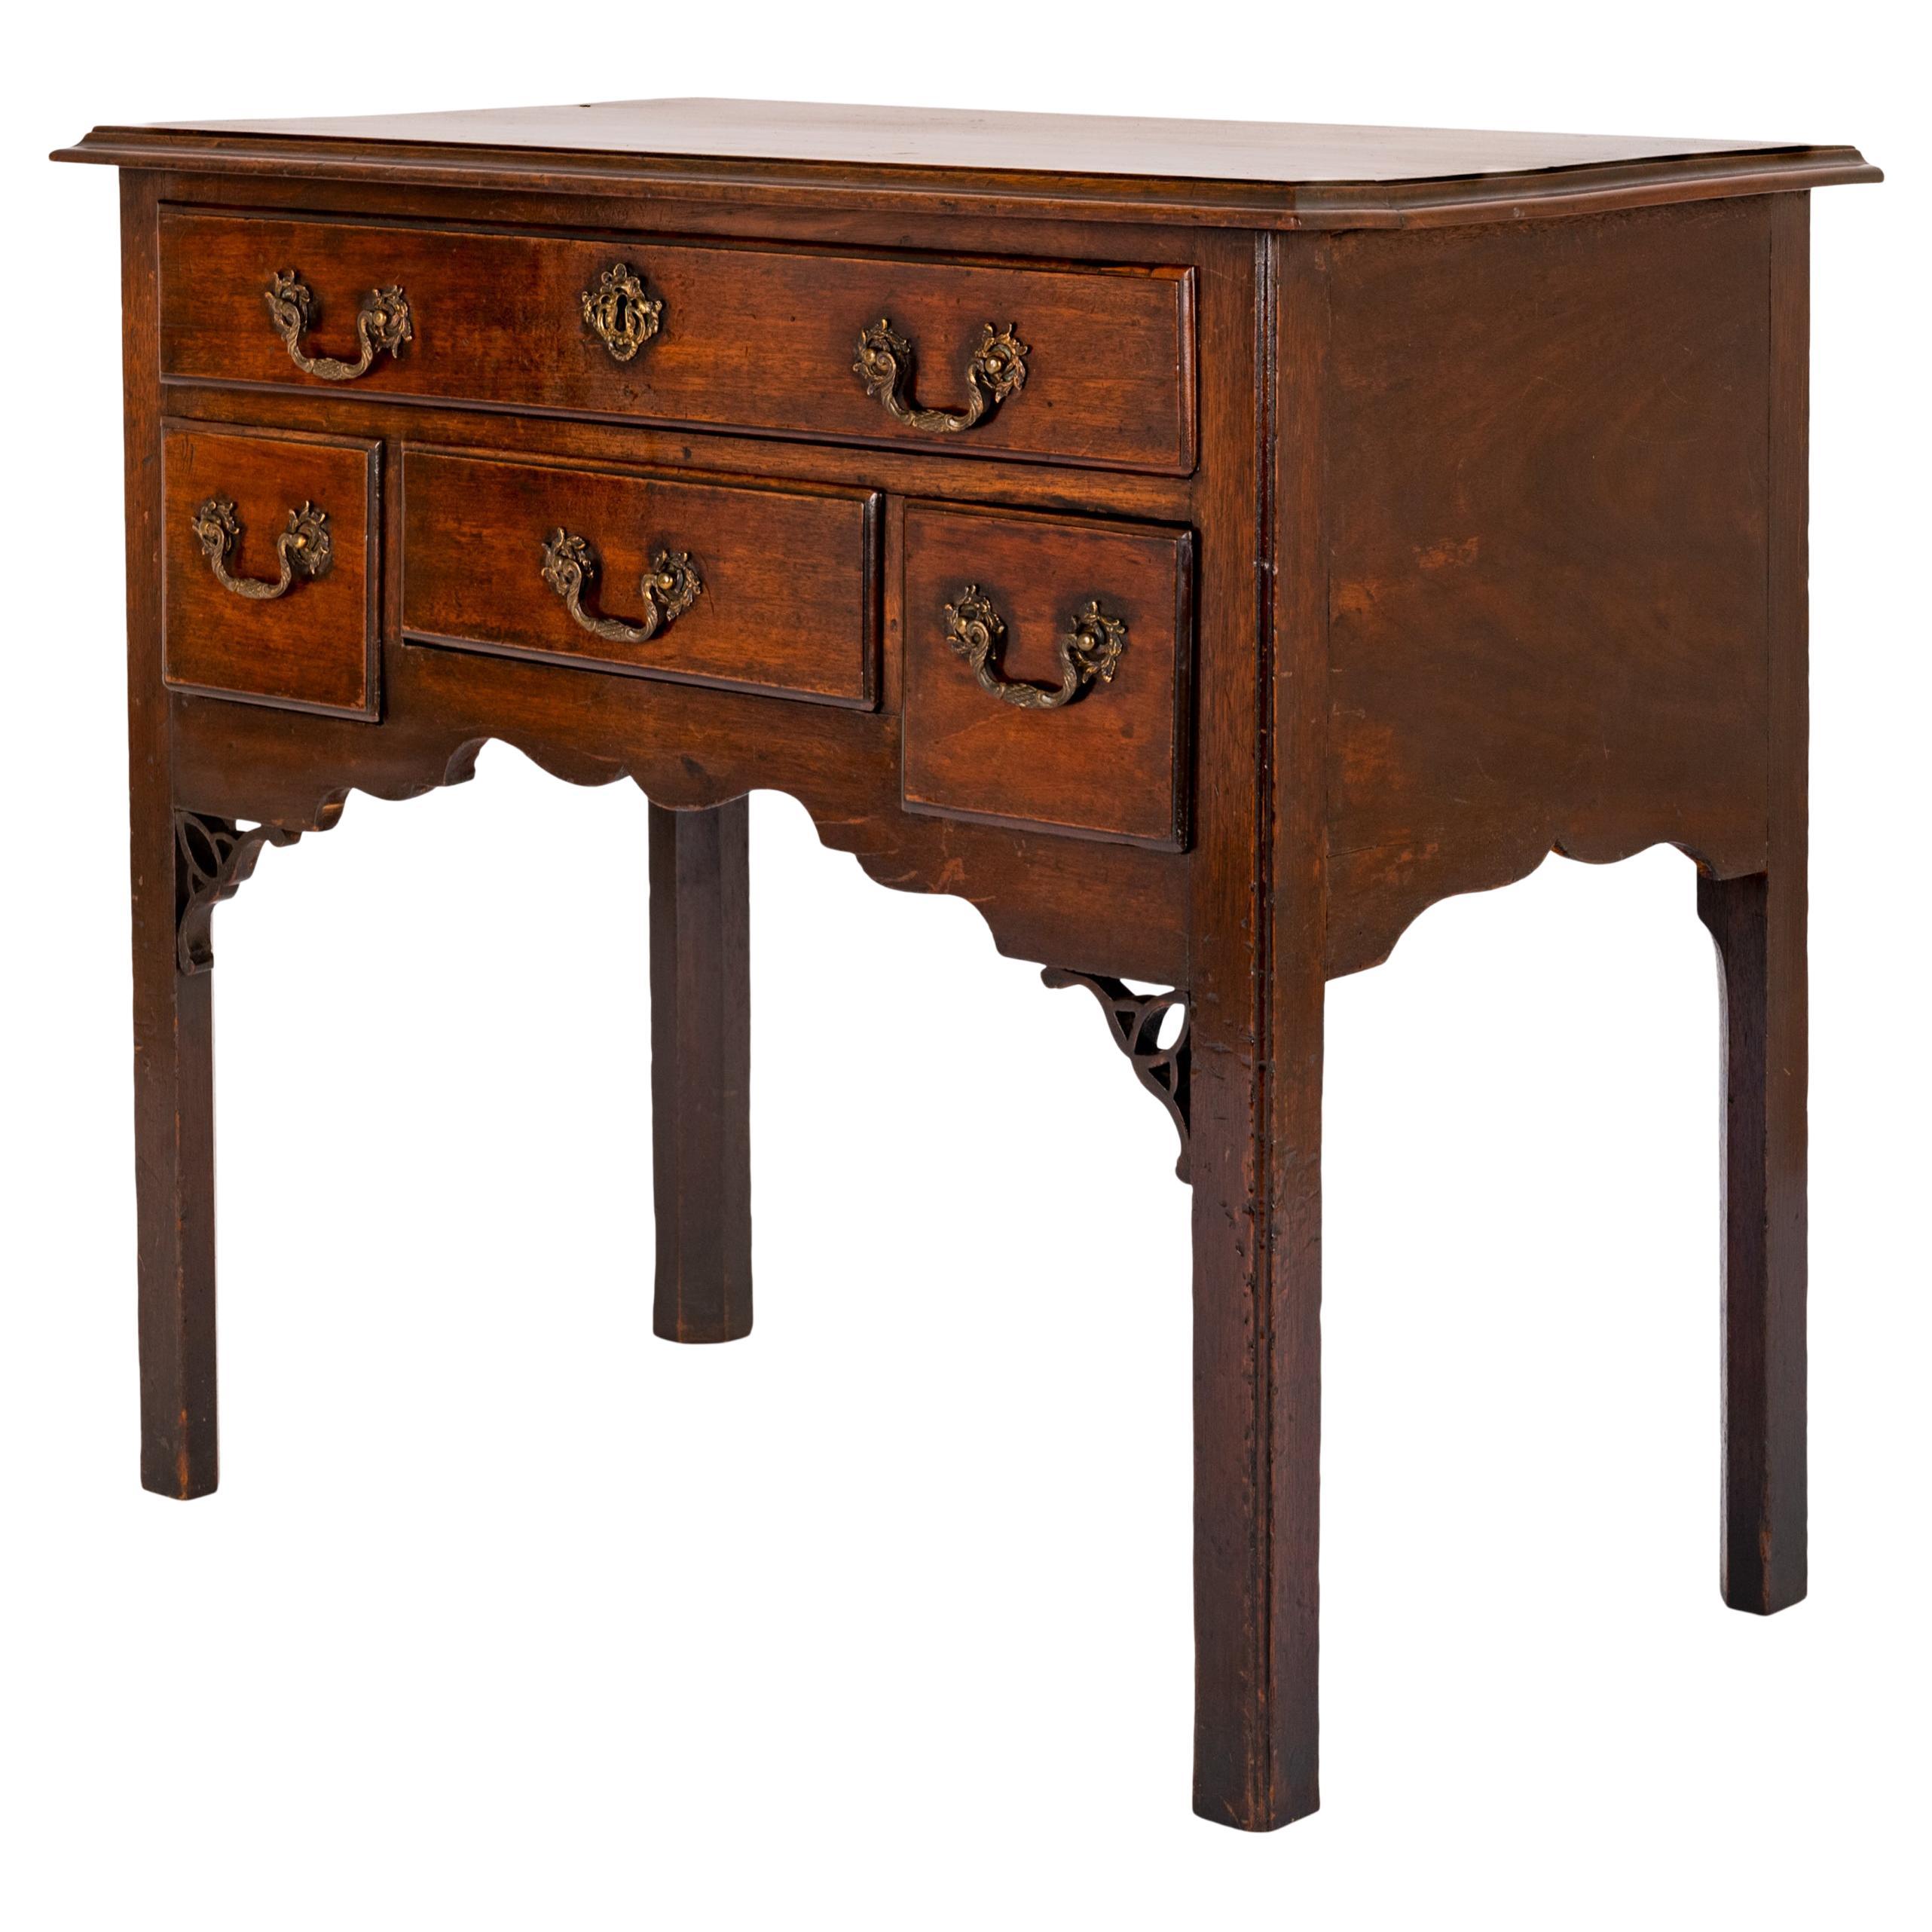 Antique English 18th C Georgian Mahogany Chippendale Lowboy Side Table 1750 For Sale